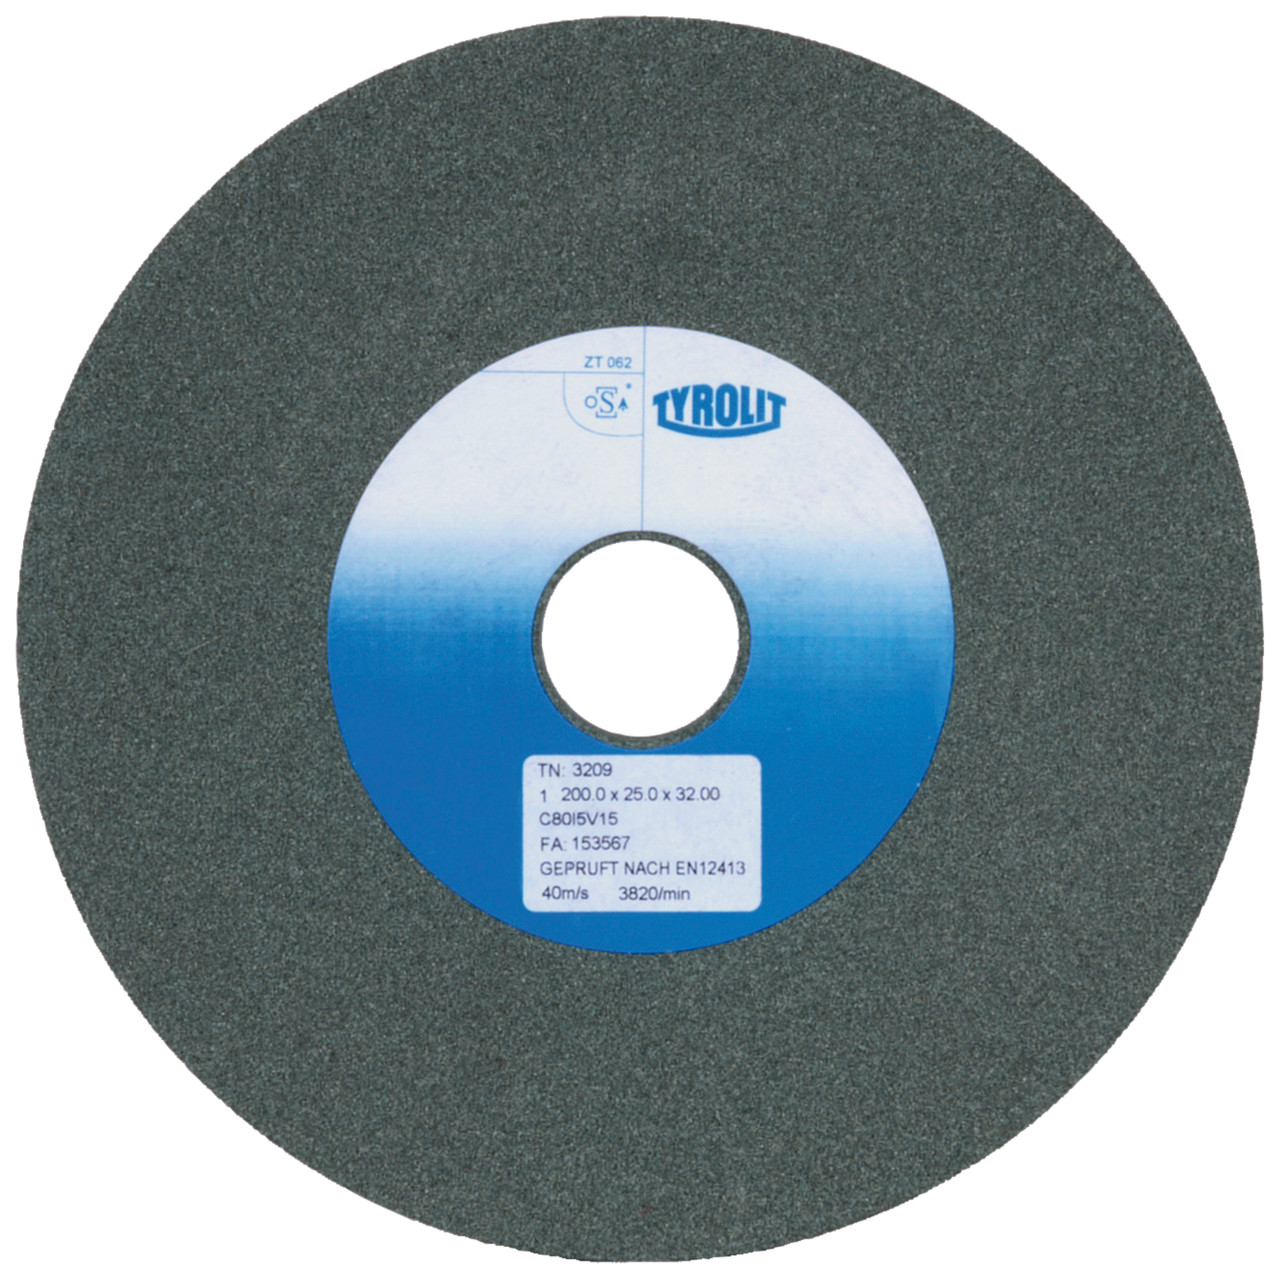 Tyrolit Conventional ceramic grinding discs DxDxH 200x25x32 For carbide and cast iron, shape: 1, Art. 3210